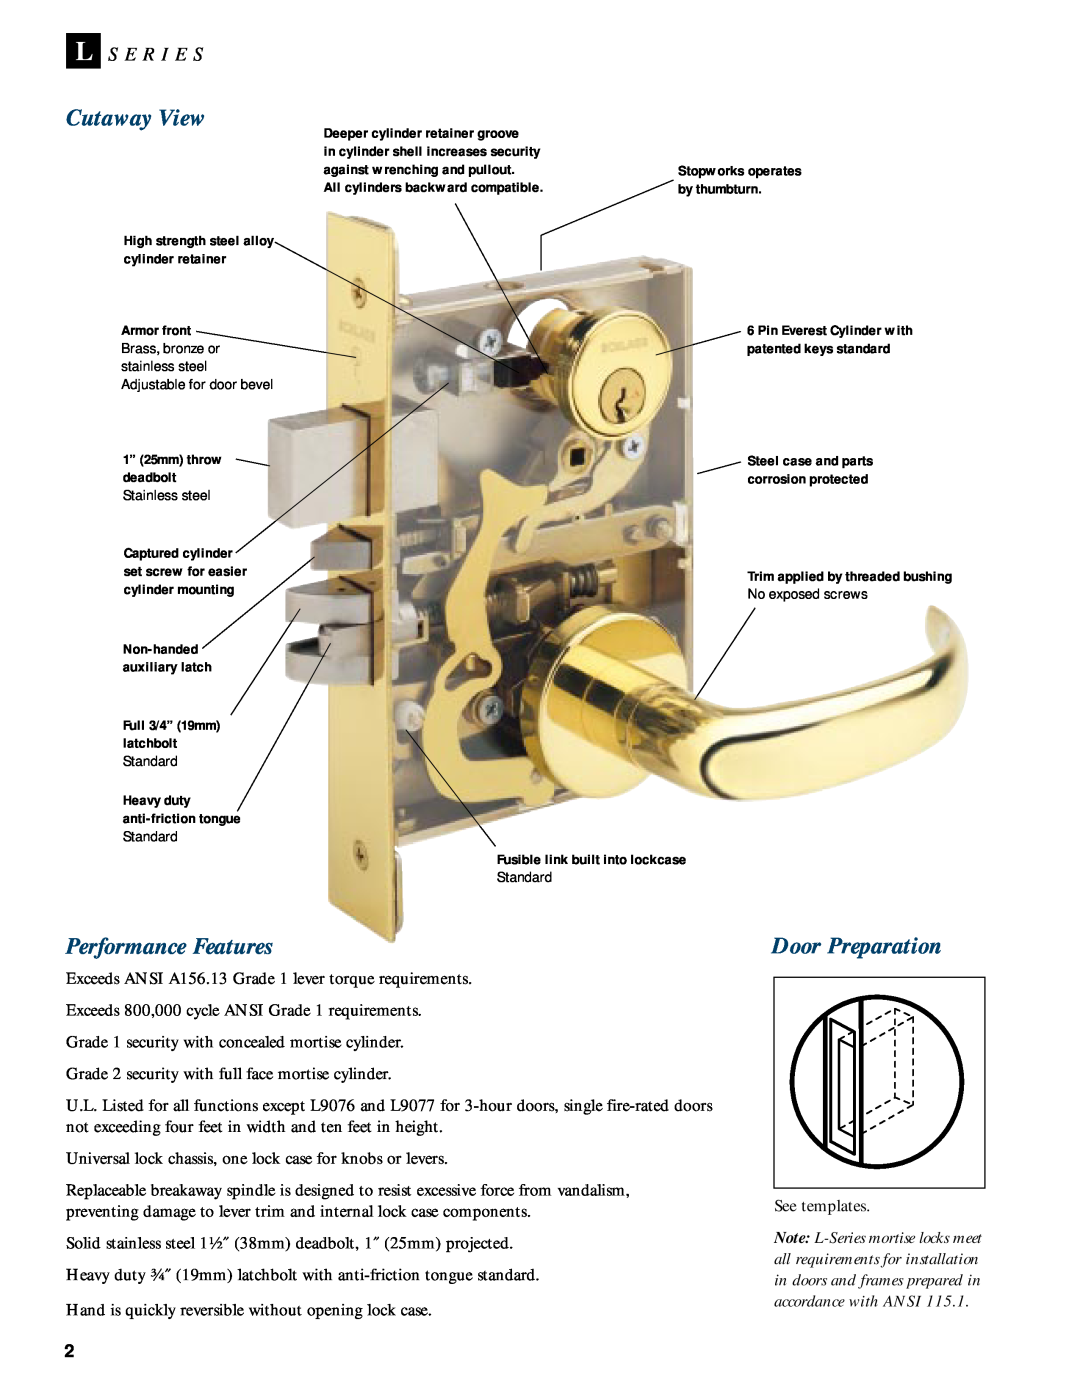 Schlage L-SERIES manual Cutaway View, Performance Features, Door Preparation, L S E R I E S 